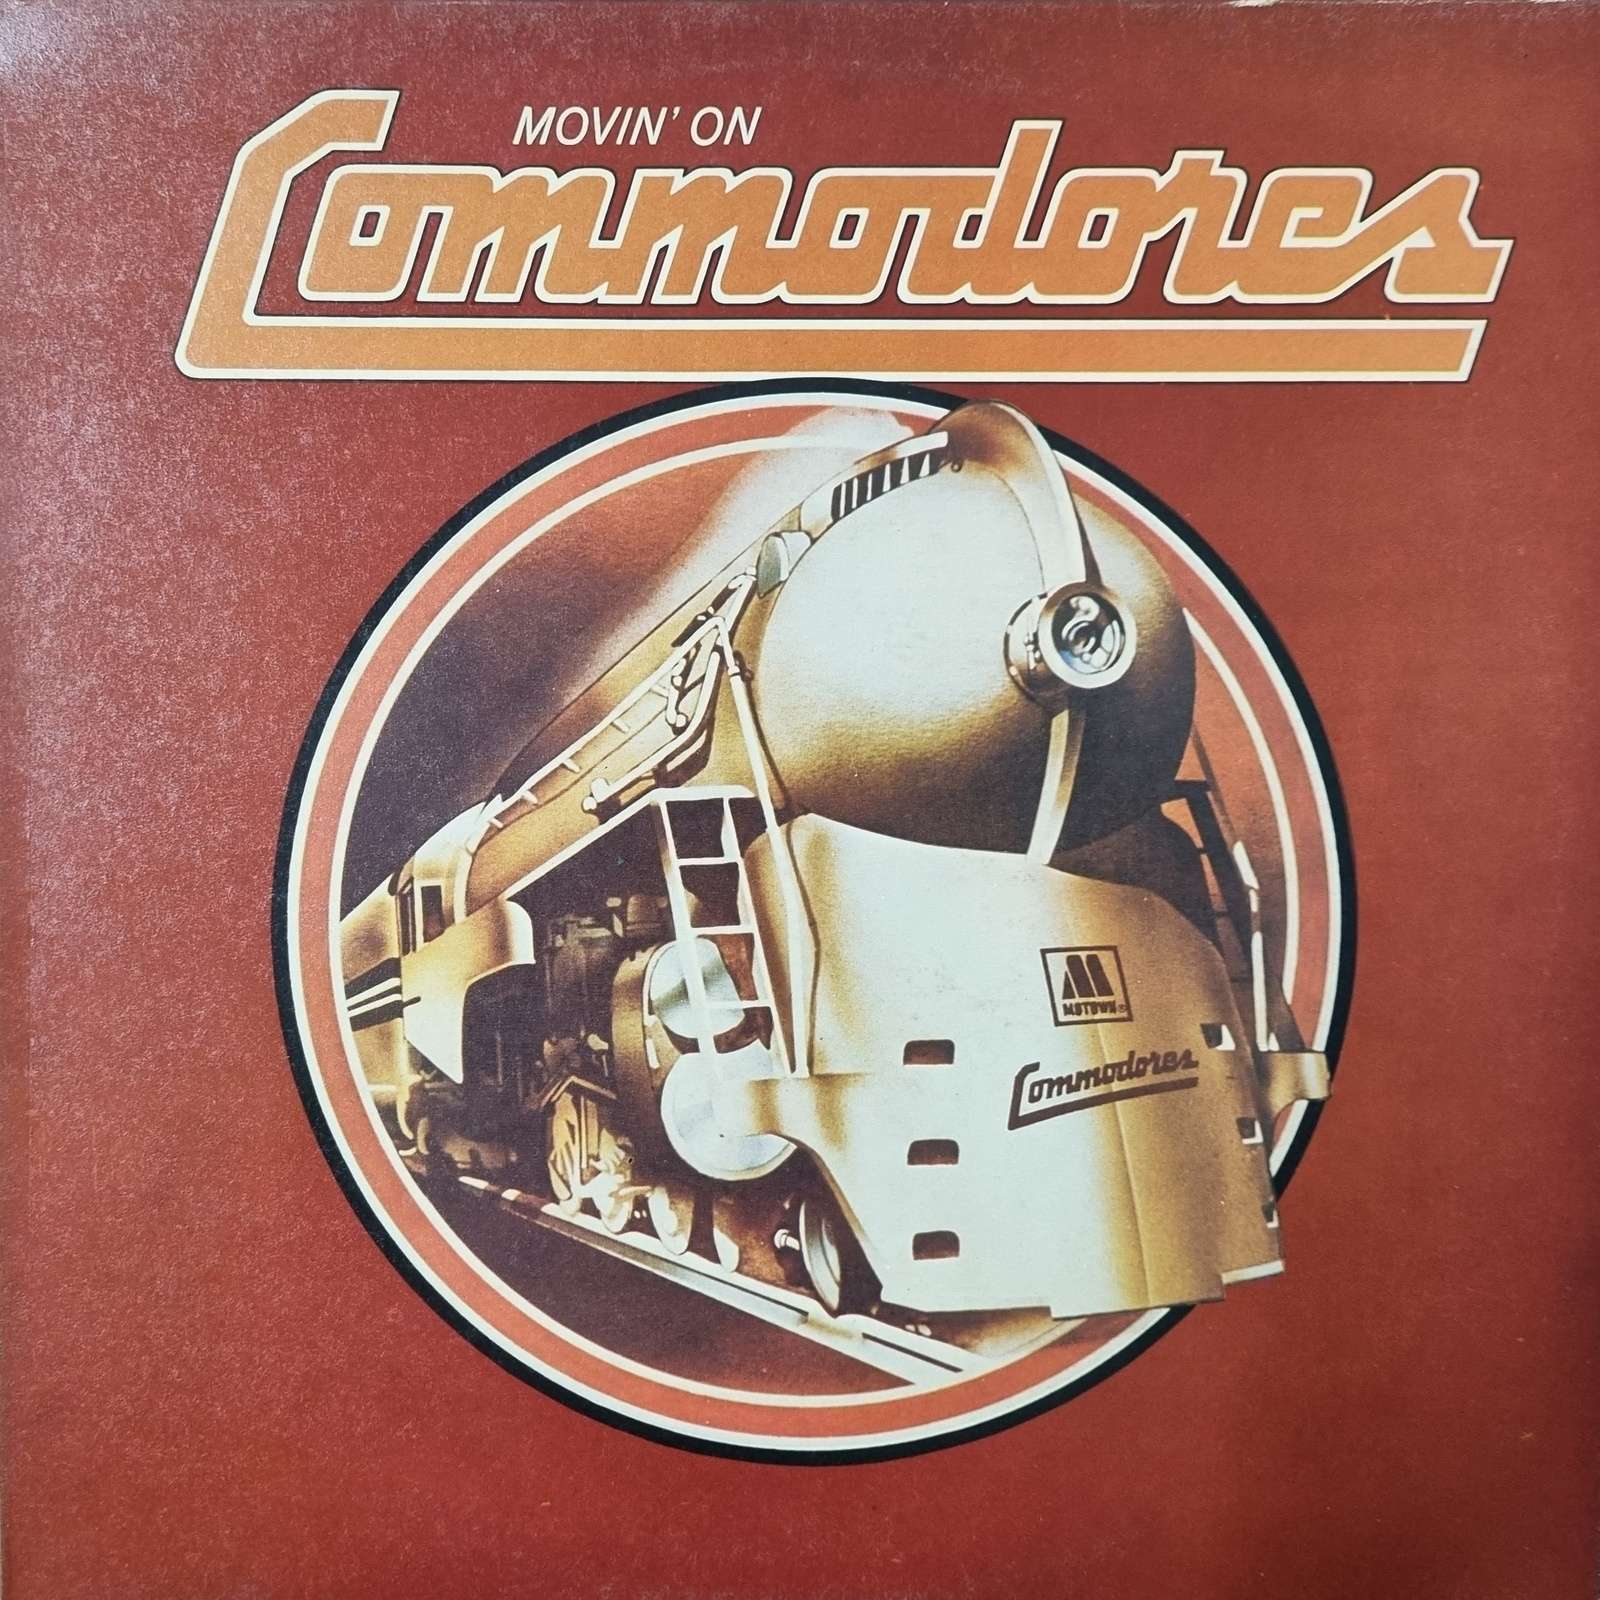 Commodores - Movin' On (LP)